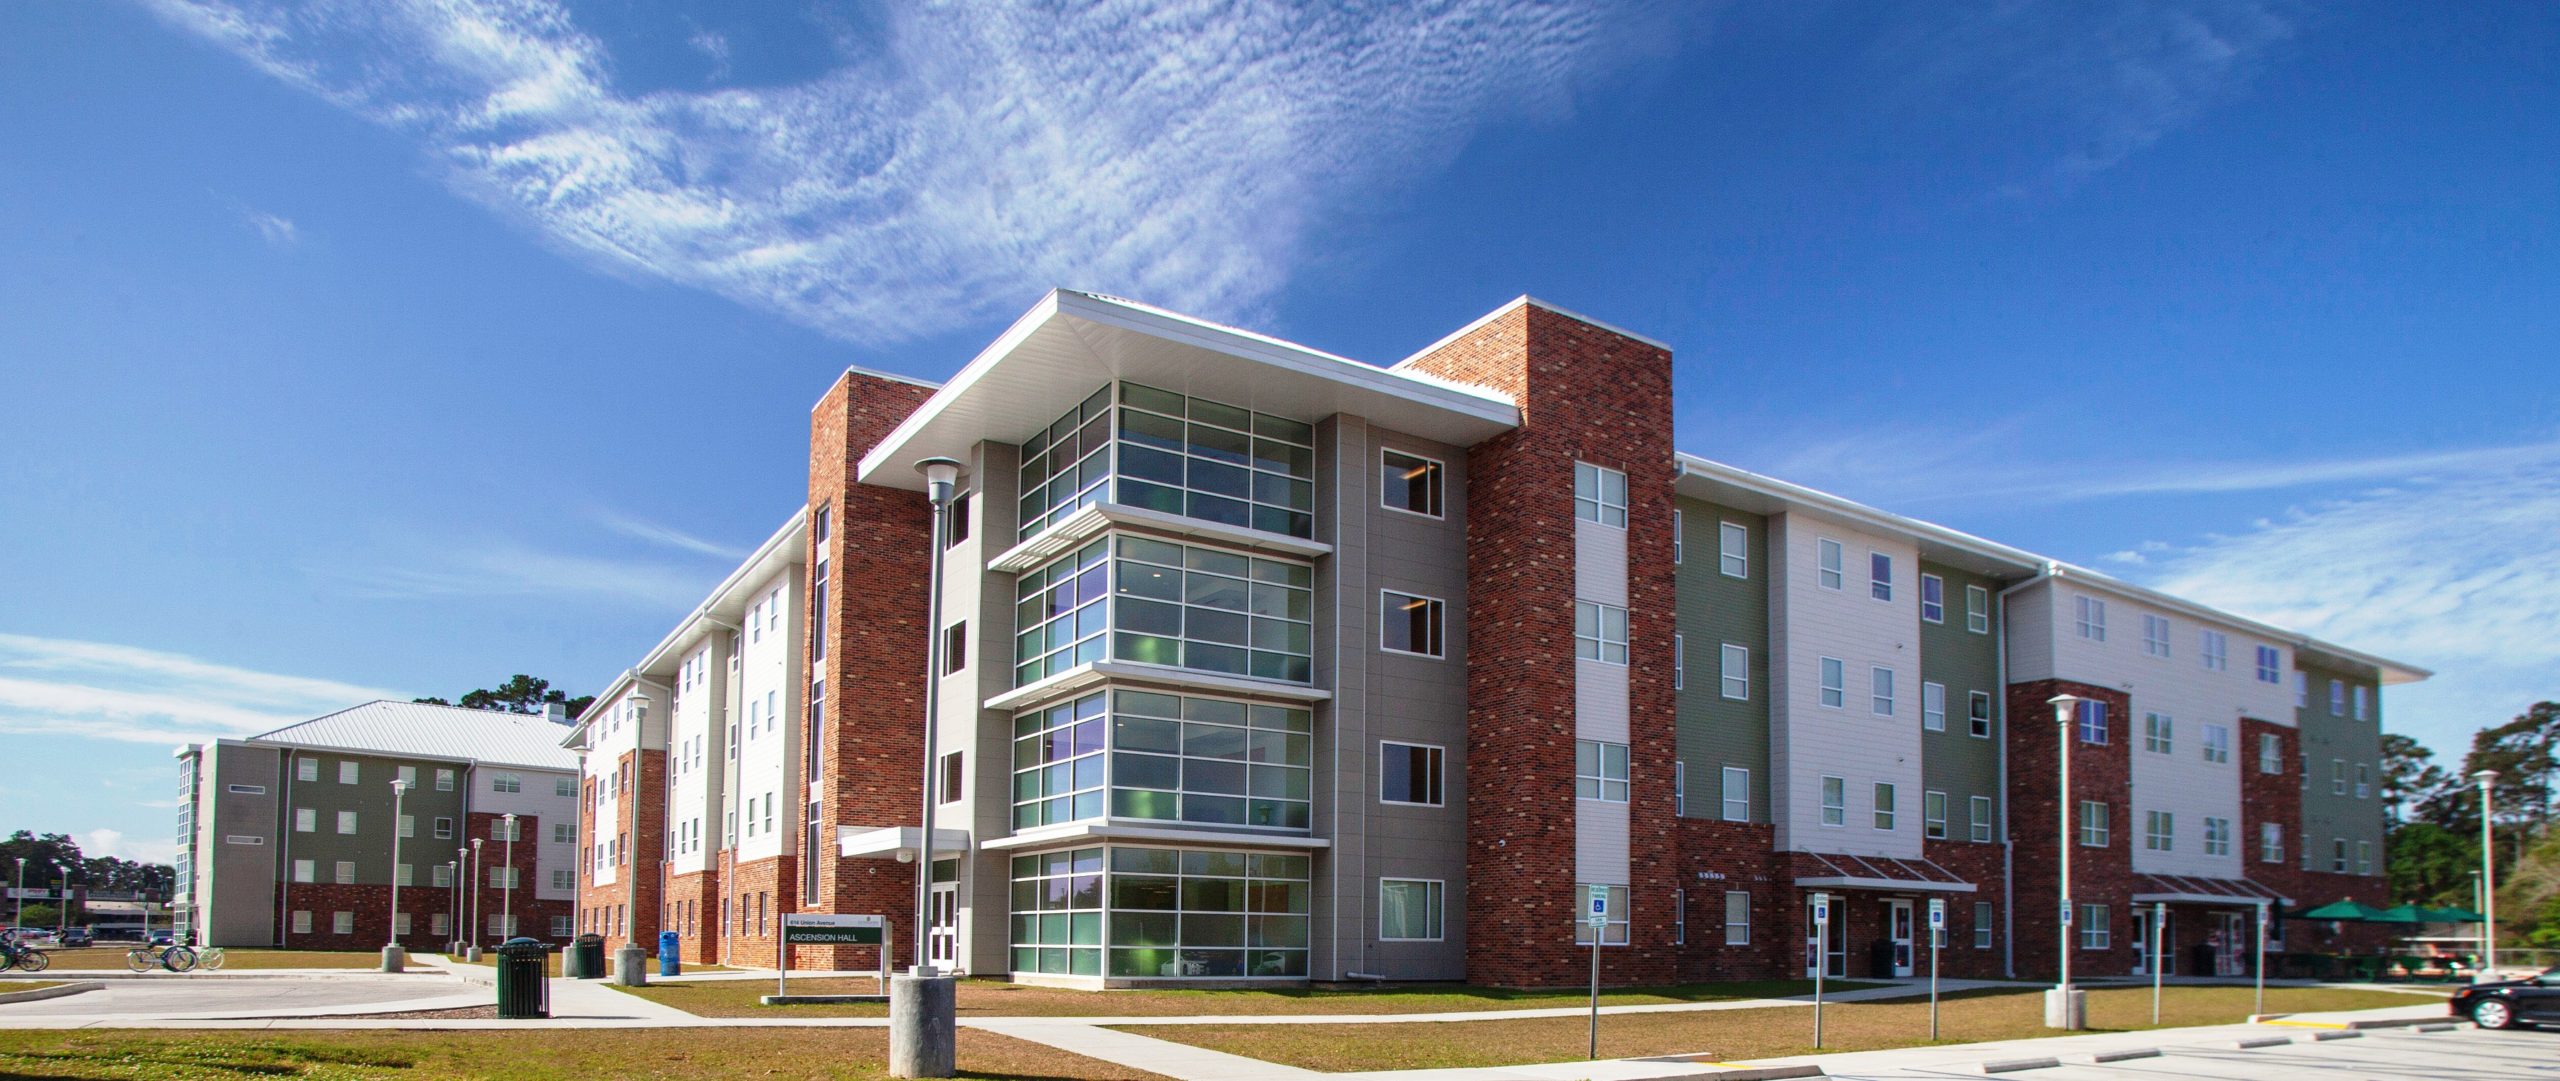 Southeastern celebrates new student housing with ribbon-cutting ceremony